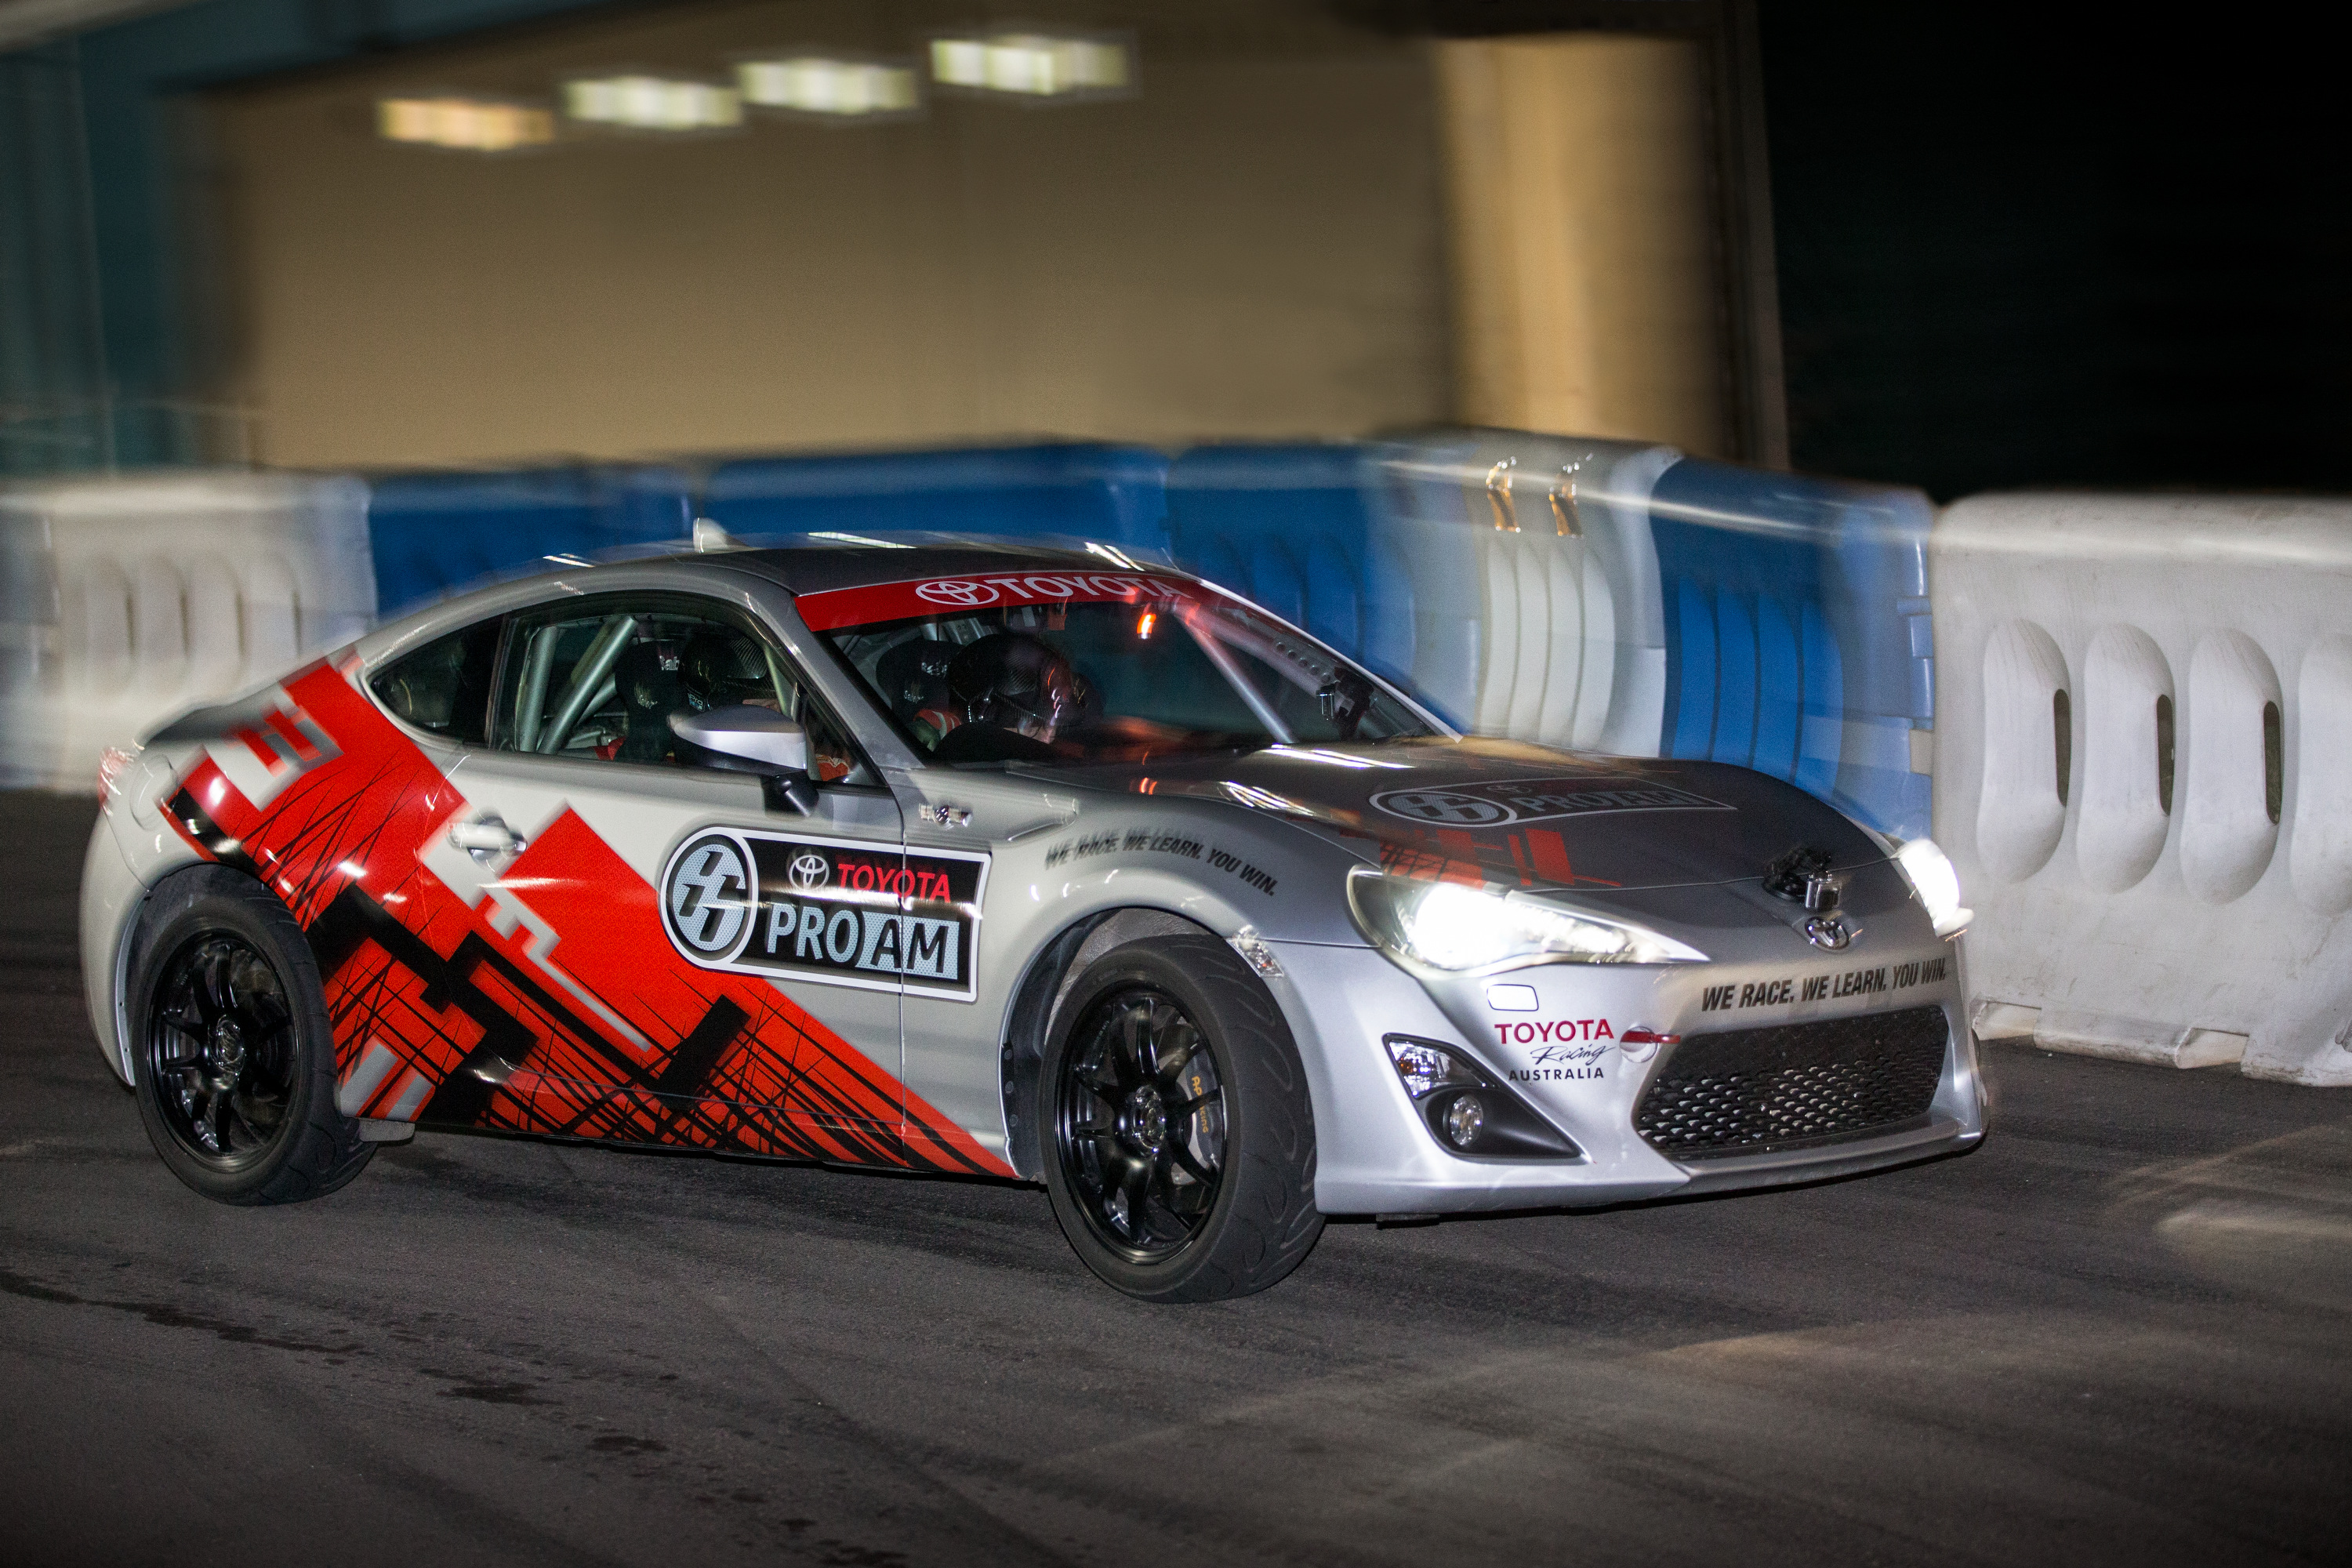 Toyota Pro Am Racing Series Announced In Conjunction With V Supercars Photos Of